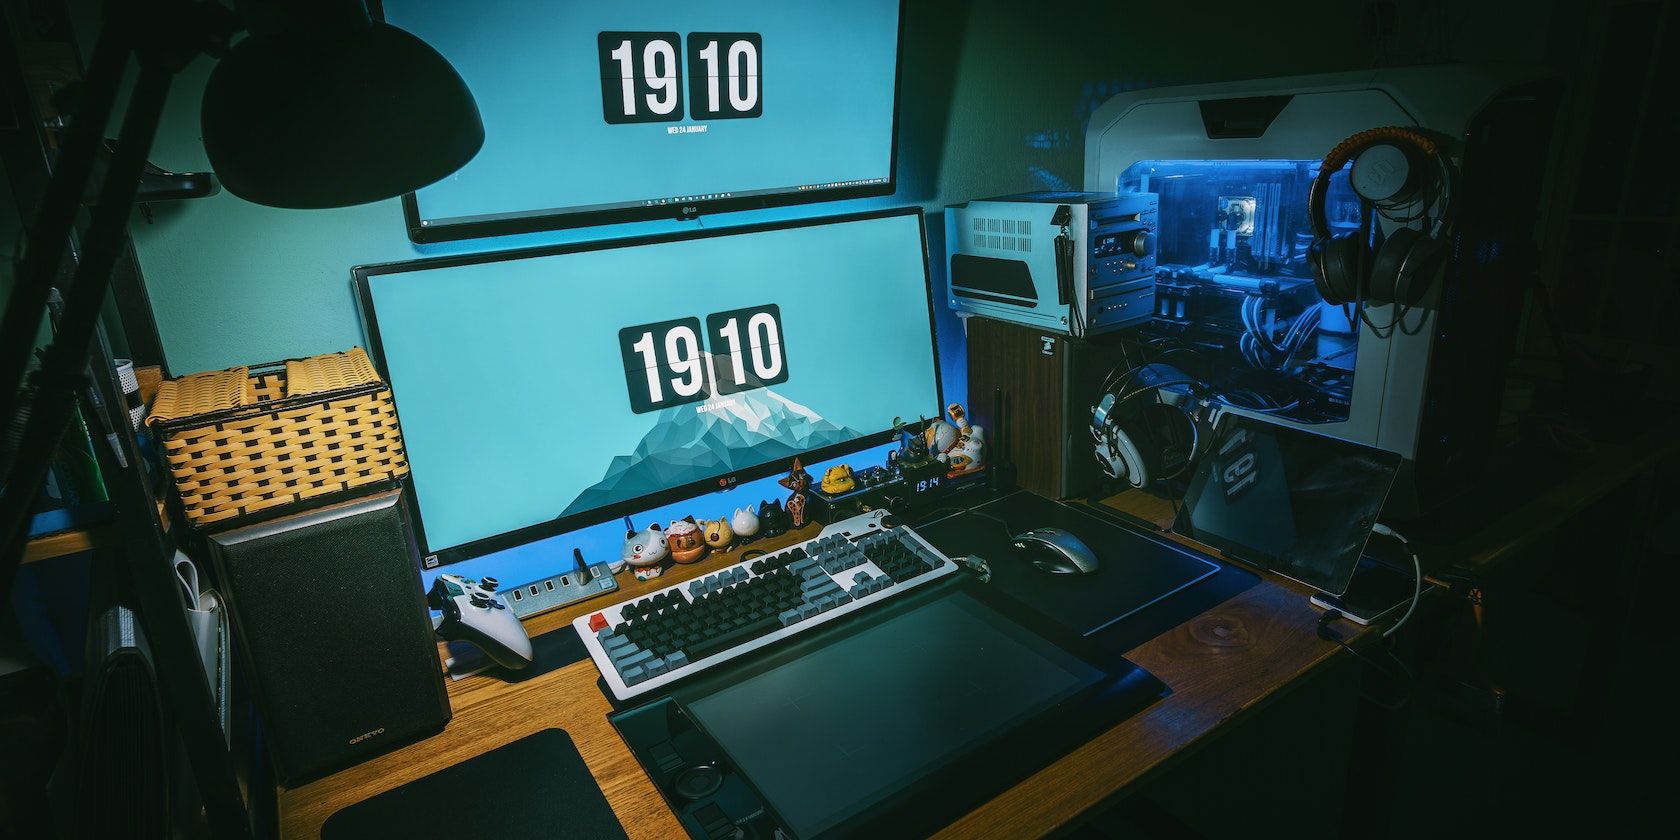 Fundy's Gaming Setup: List of Fundy's Gaming Gear Specs, PC Specs, and more